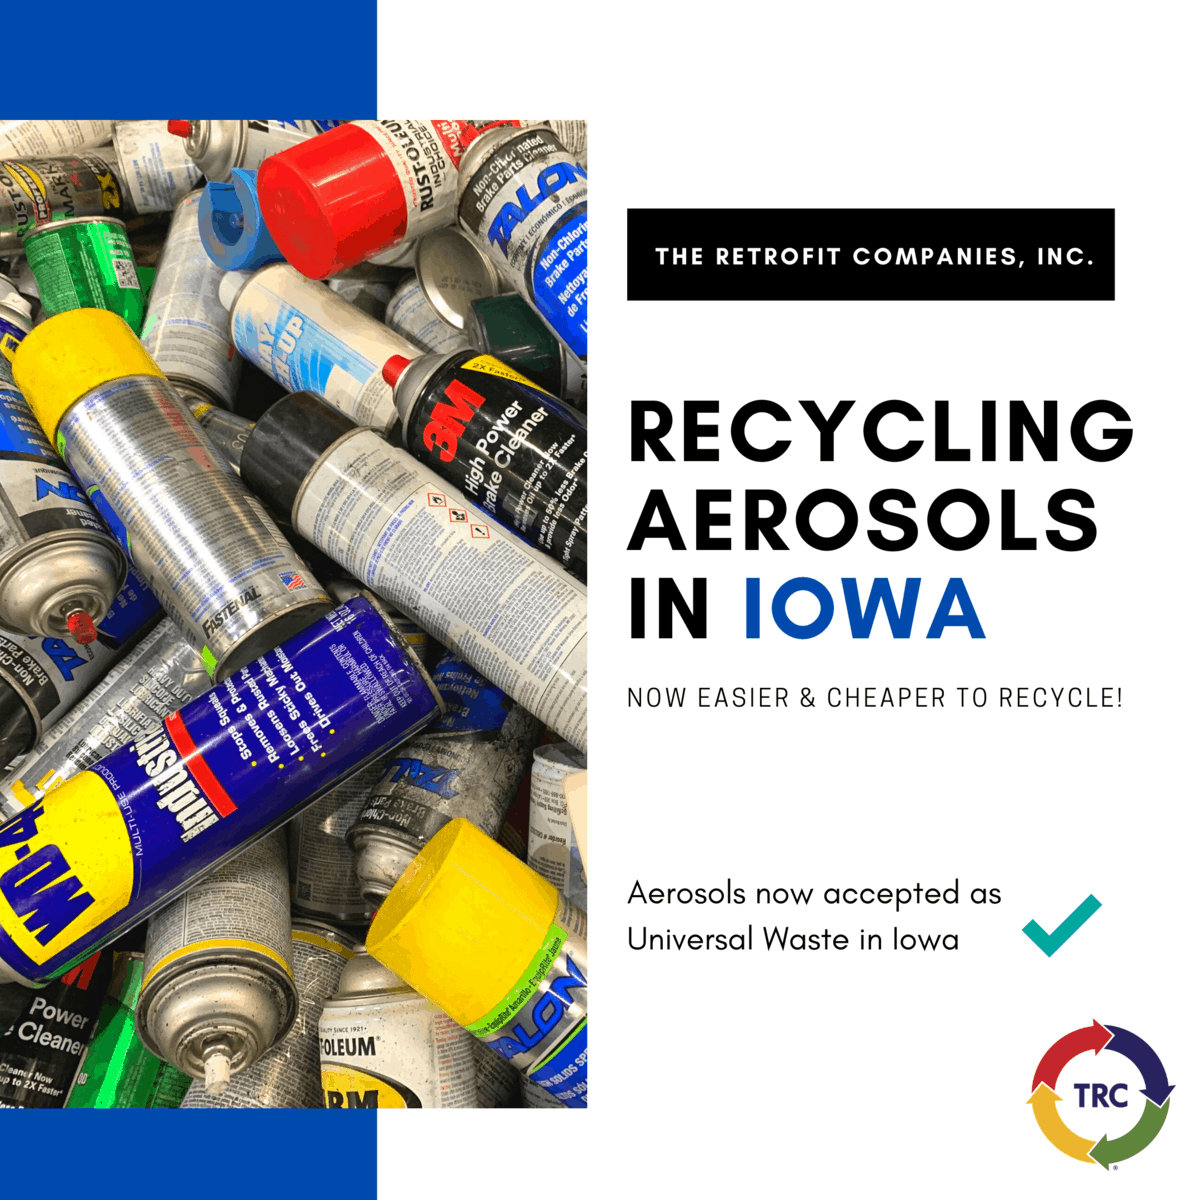 Aerosol Waste now accepted in Iowa as Universal Waste: Schedule a Pickup with TRC to recycle your Aerosol Waste